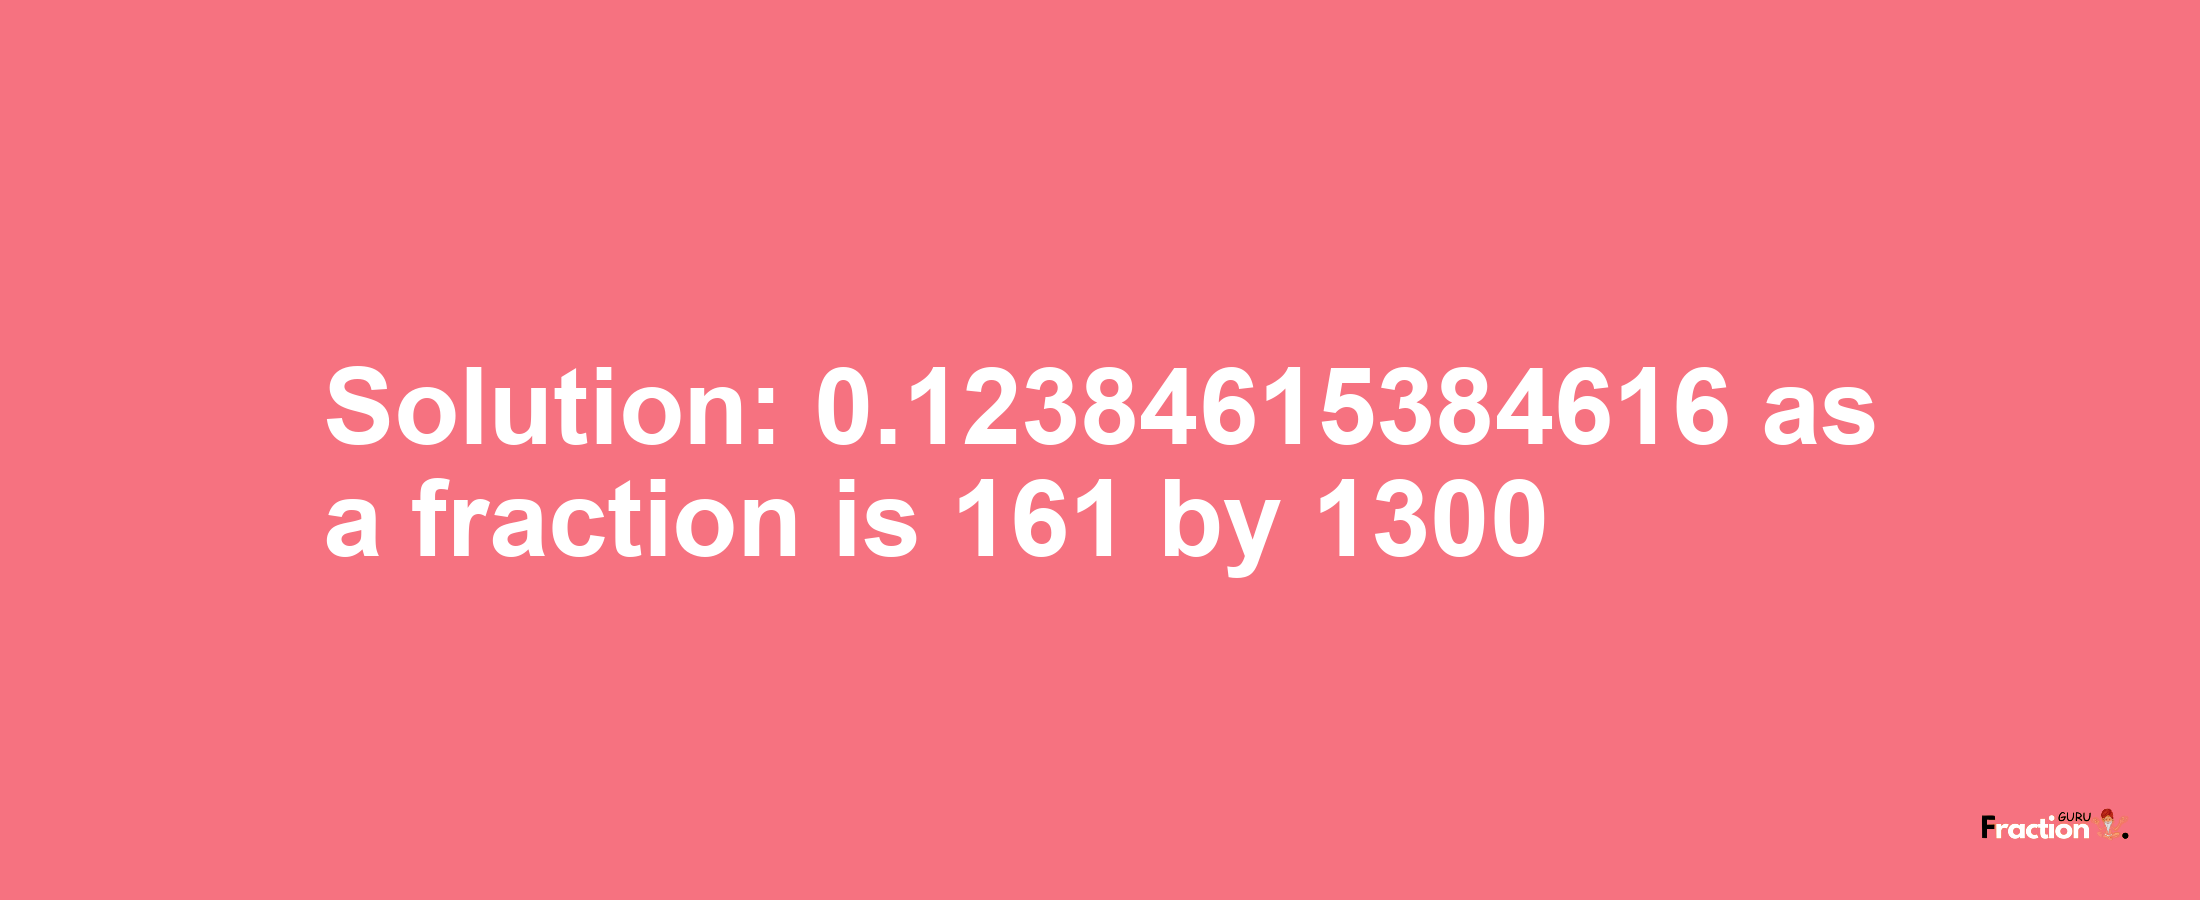 Solution:0.12384615384616 as a fraction is 161/1300